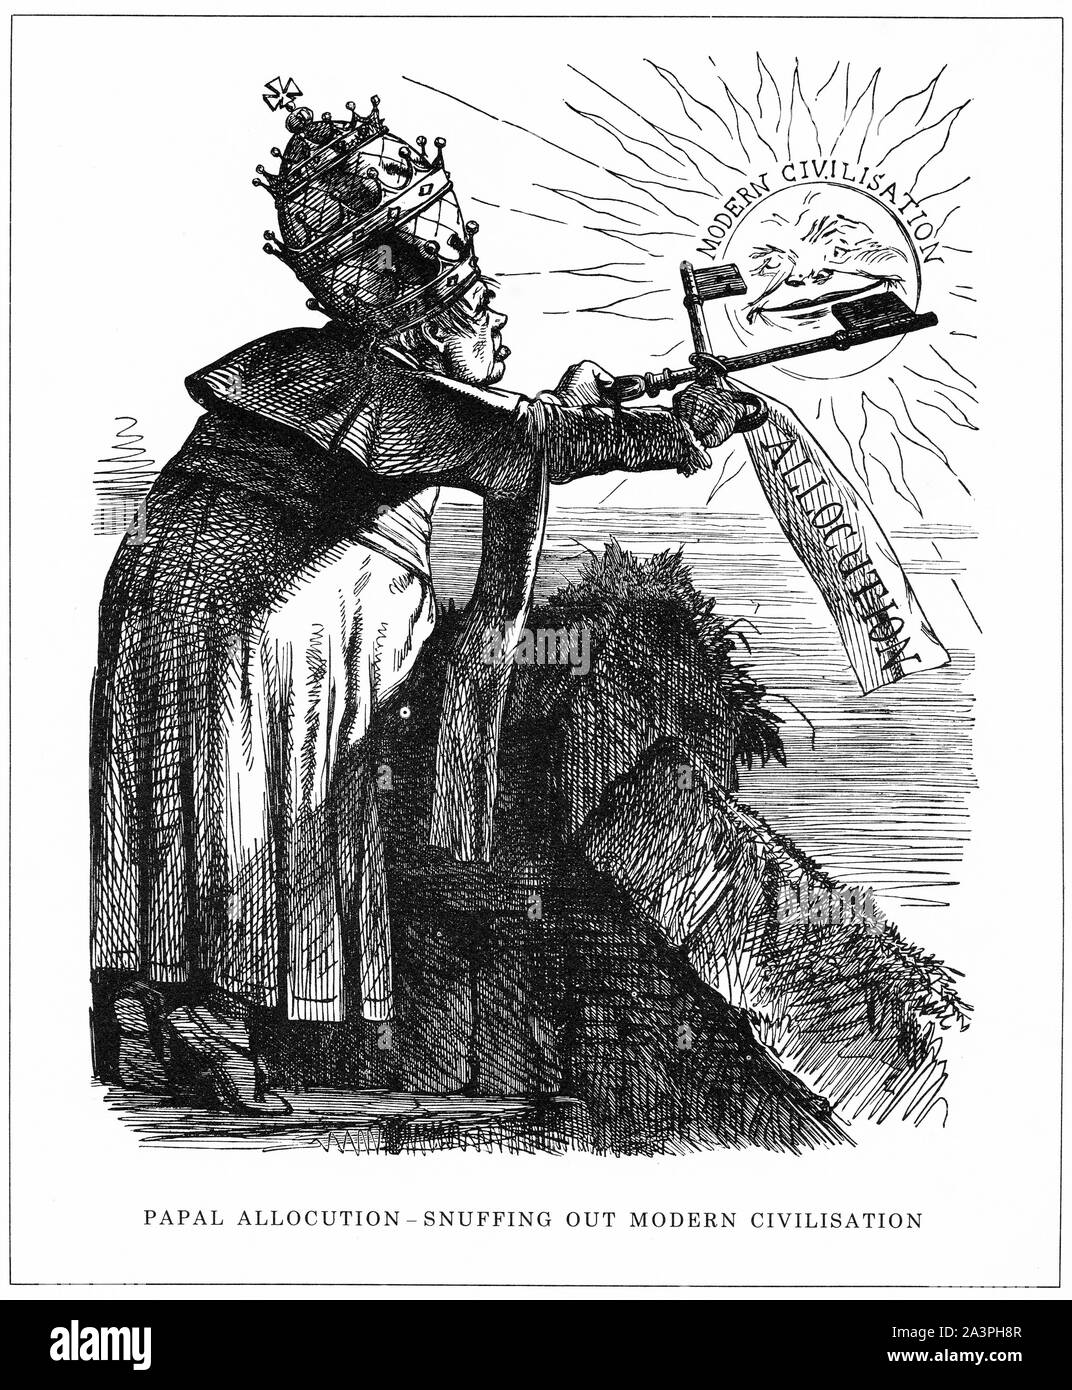 Engraving of Pope Pius IX making a papal allocution, or speech, to his cardinals on 18 March 1861 called Jamdudum cernimus, a declaration that the papacy cannot support any system to de-christianize the world, as was brewing with the rise of evolution and athiesism. From Punch magazine, 1861. Stock Photo